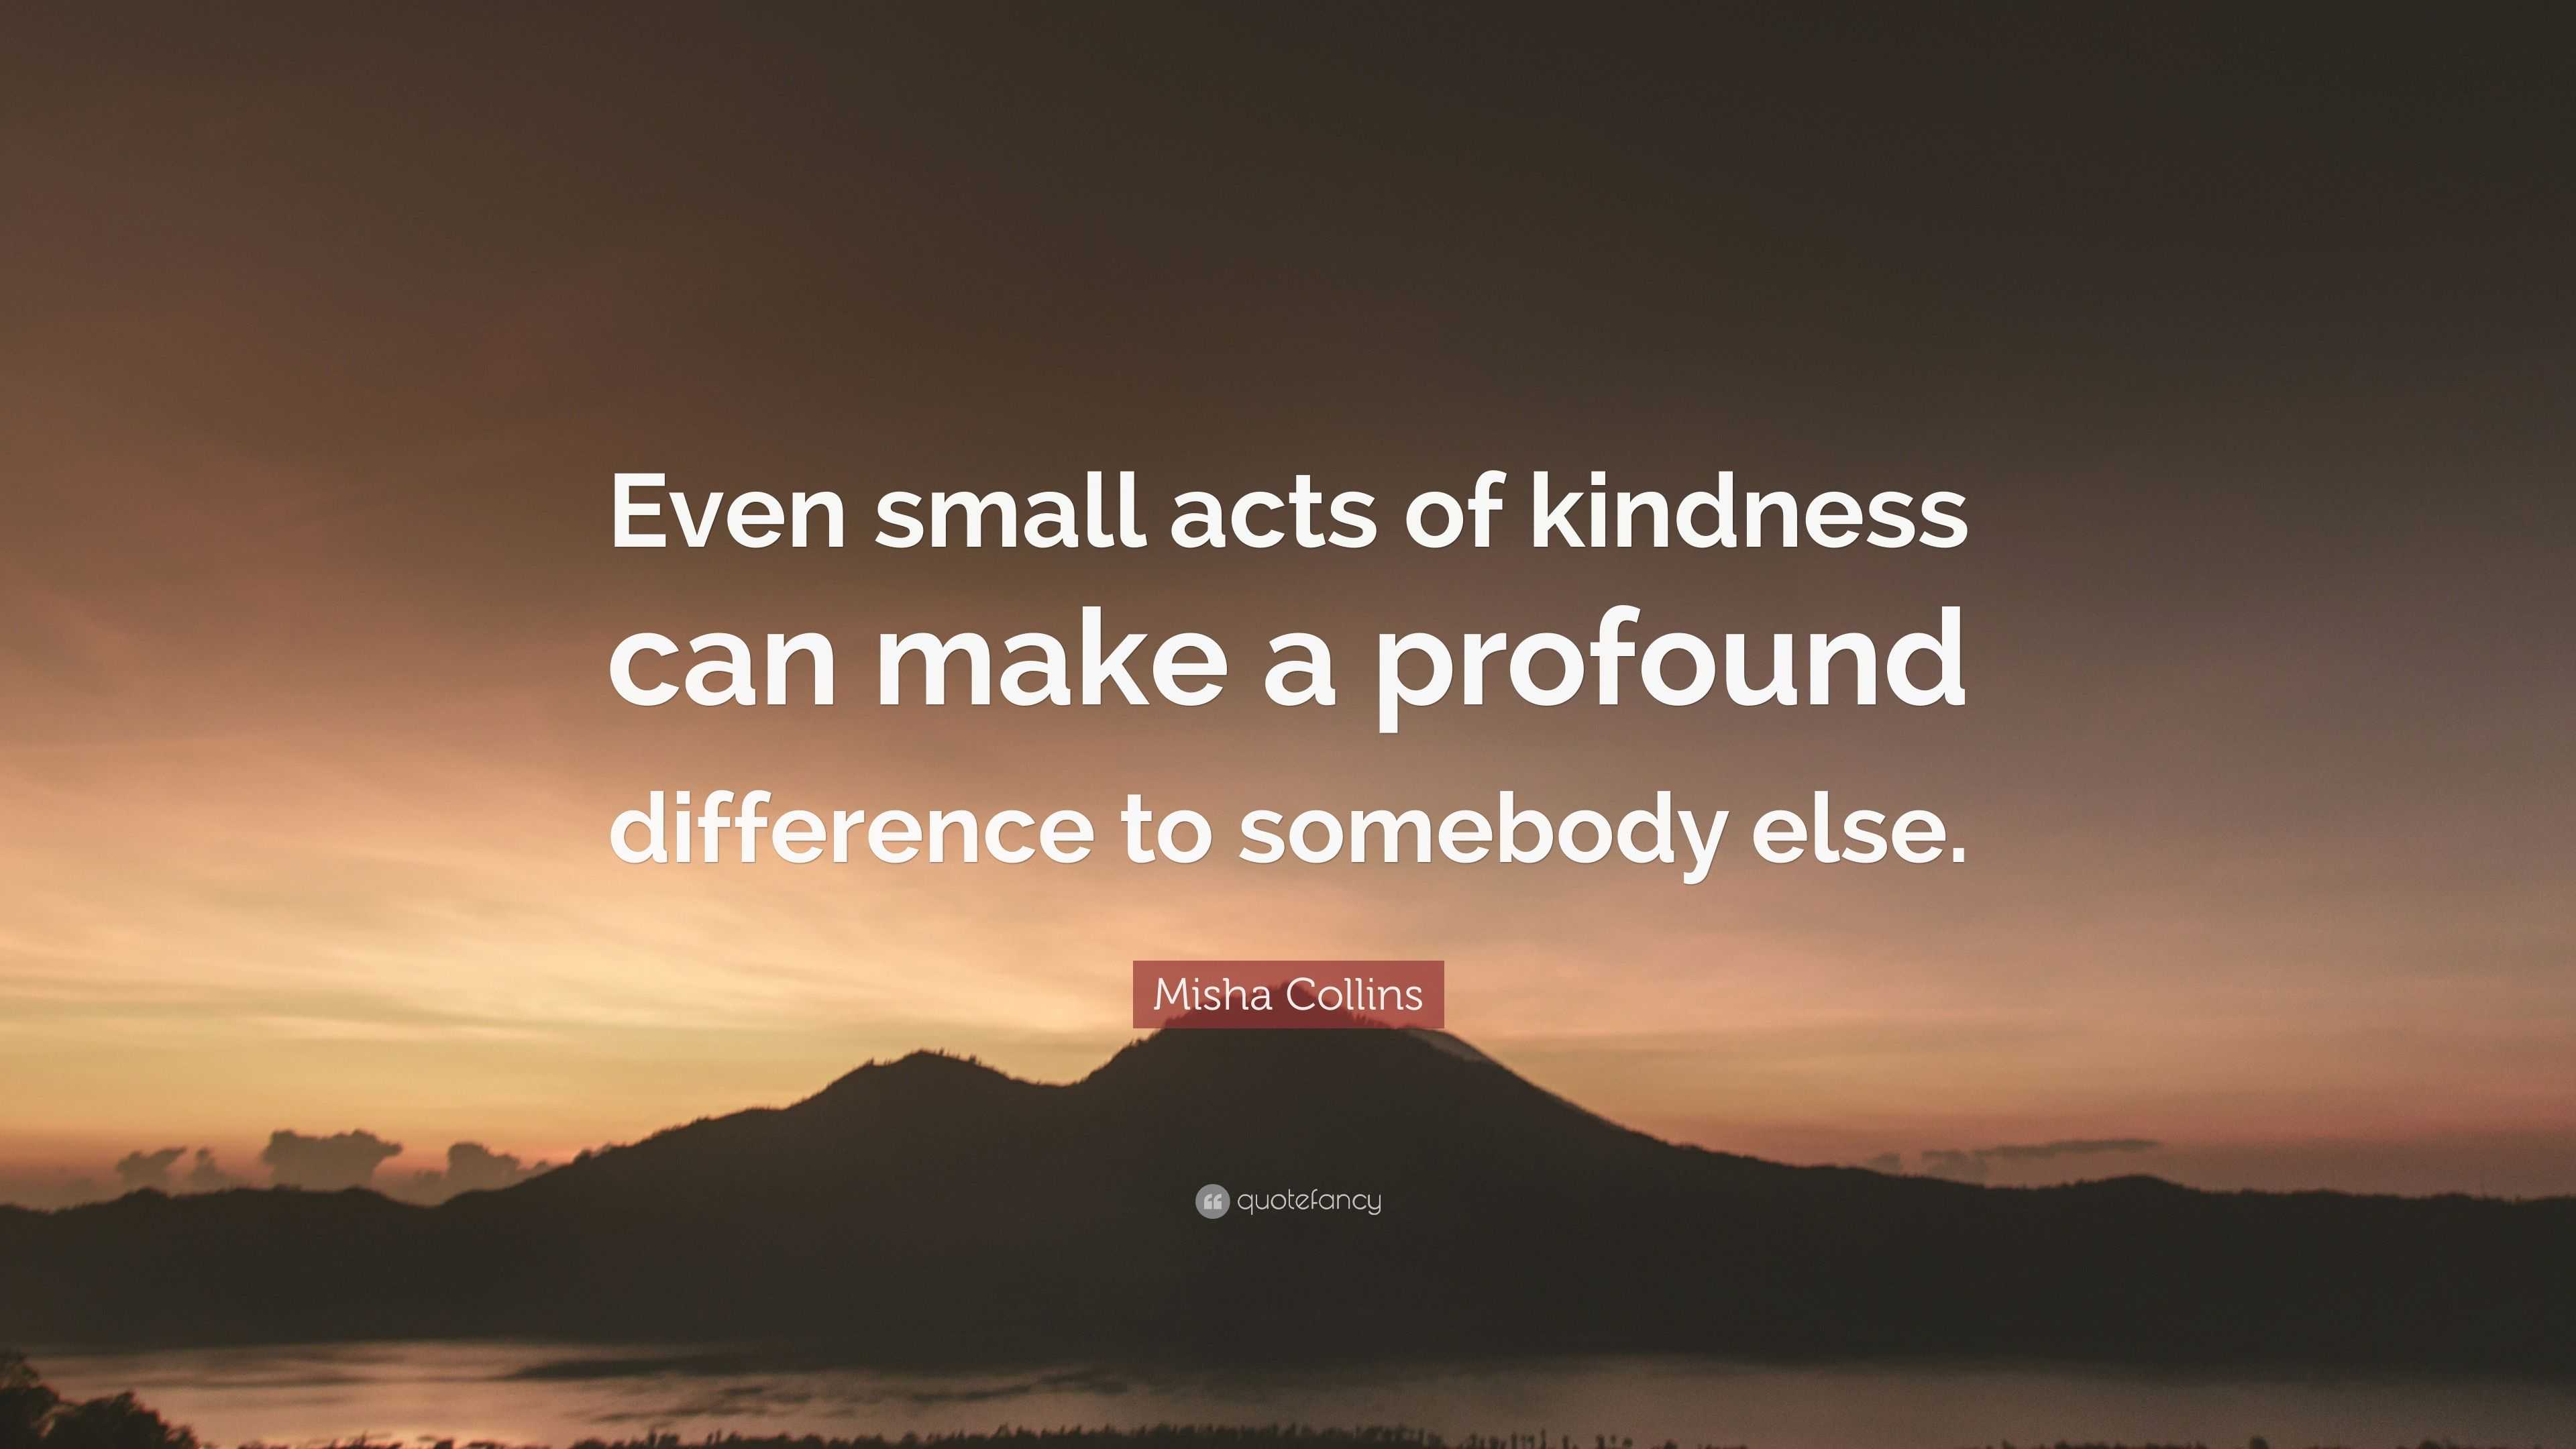 Misha Collins Quote: “Even small acts of kindness can make a profound